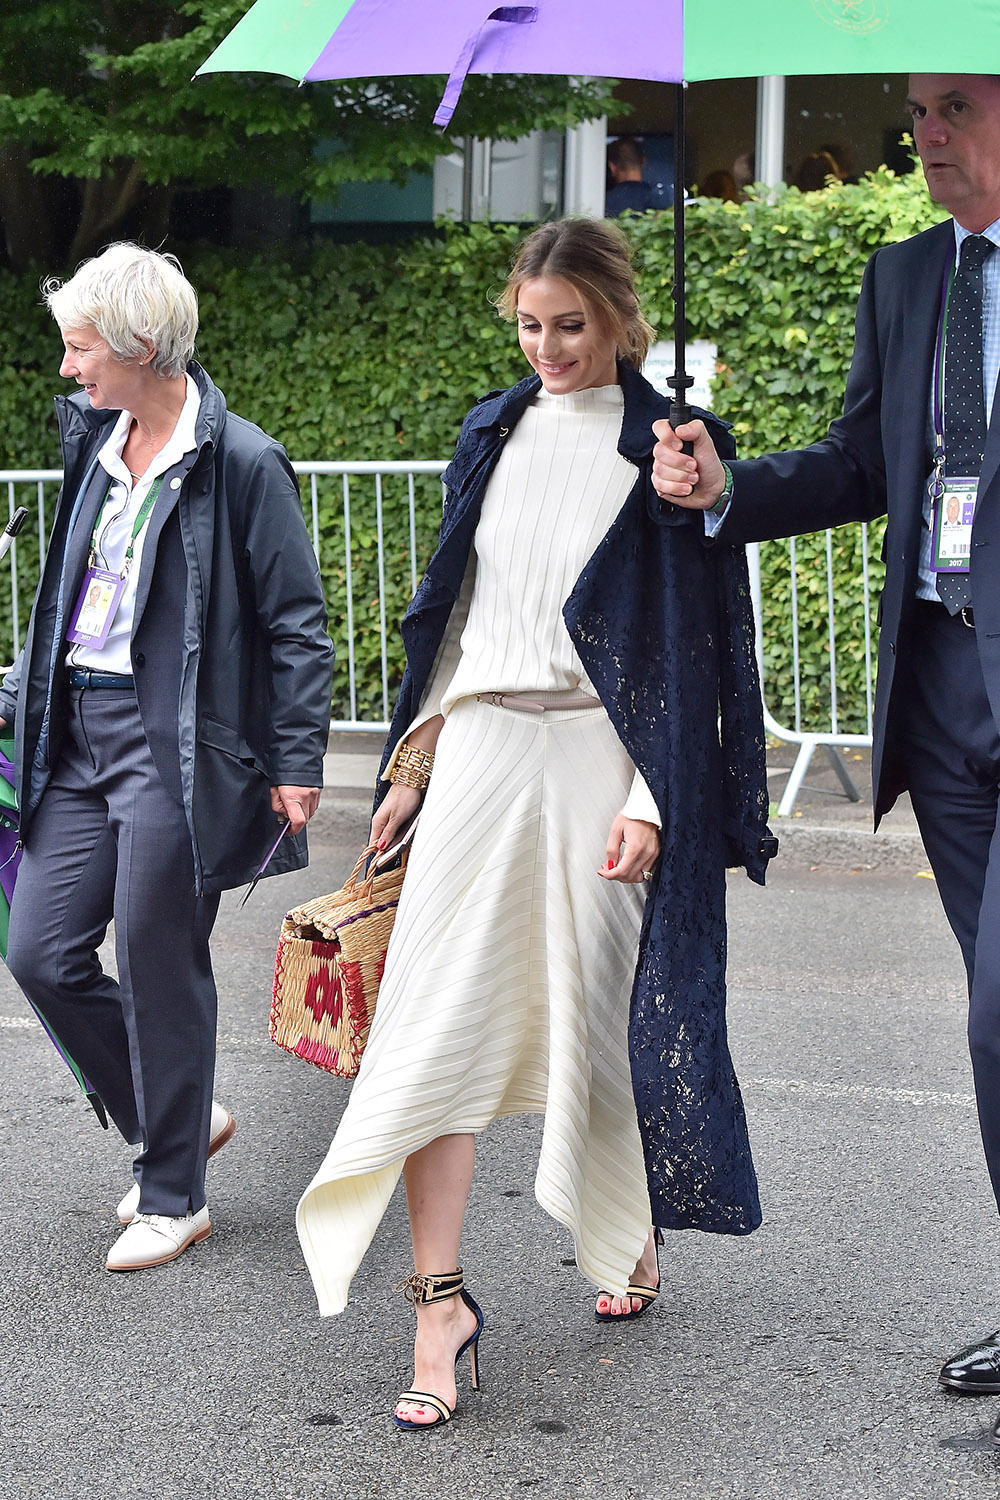 Olivia Palermo nailing 'tennis spectator chic' en route to Wimbledon in London.